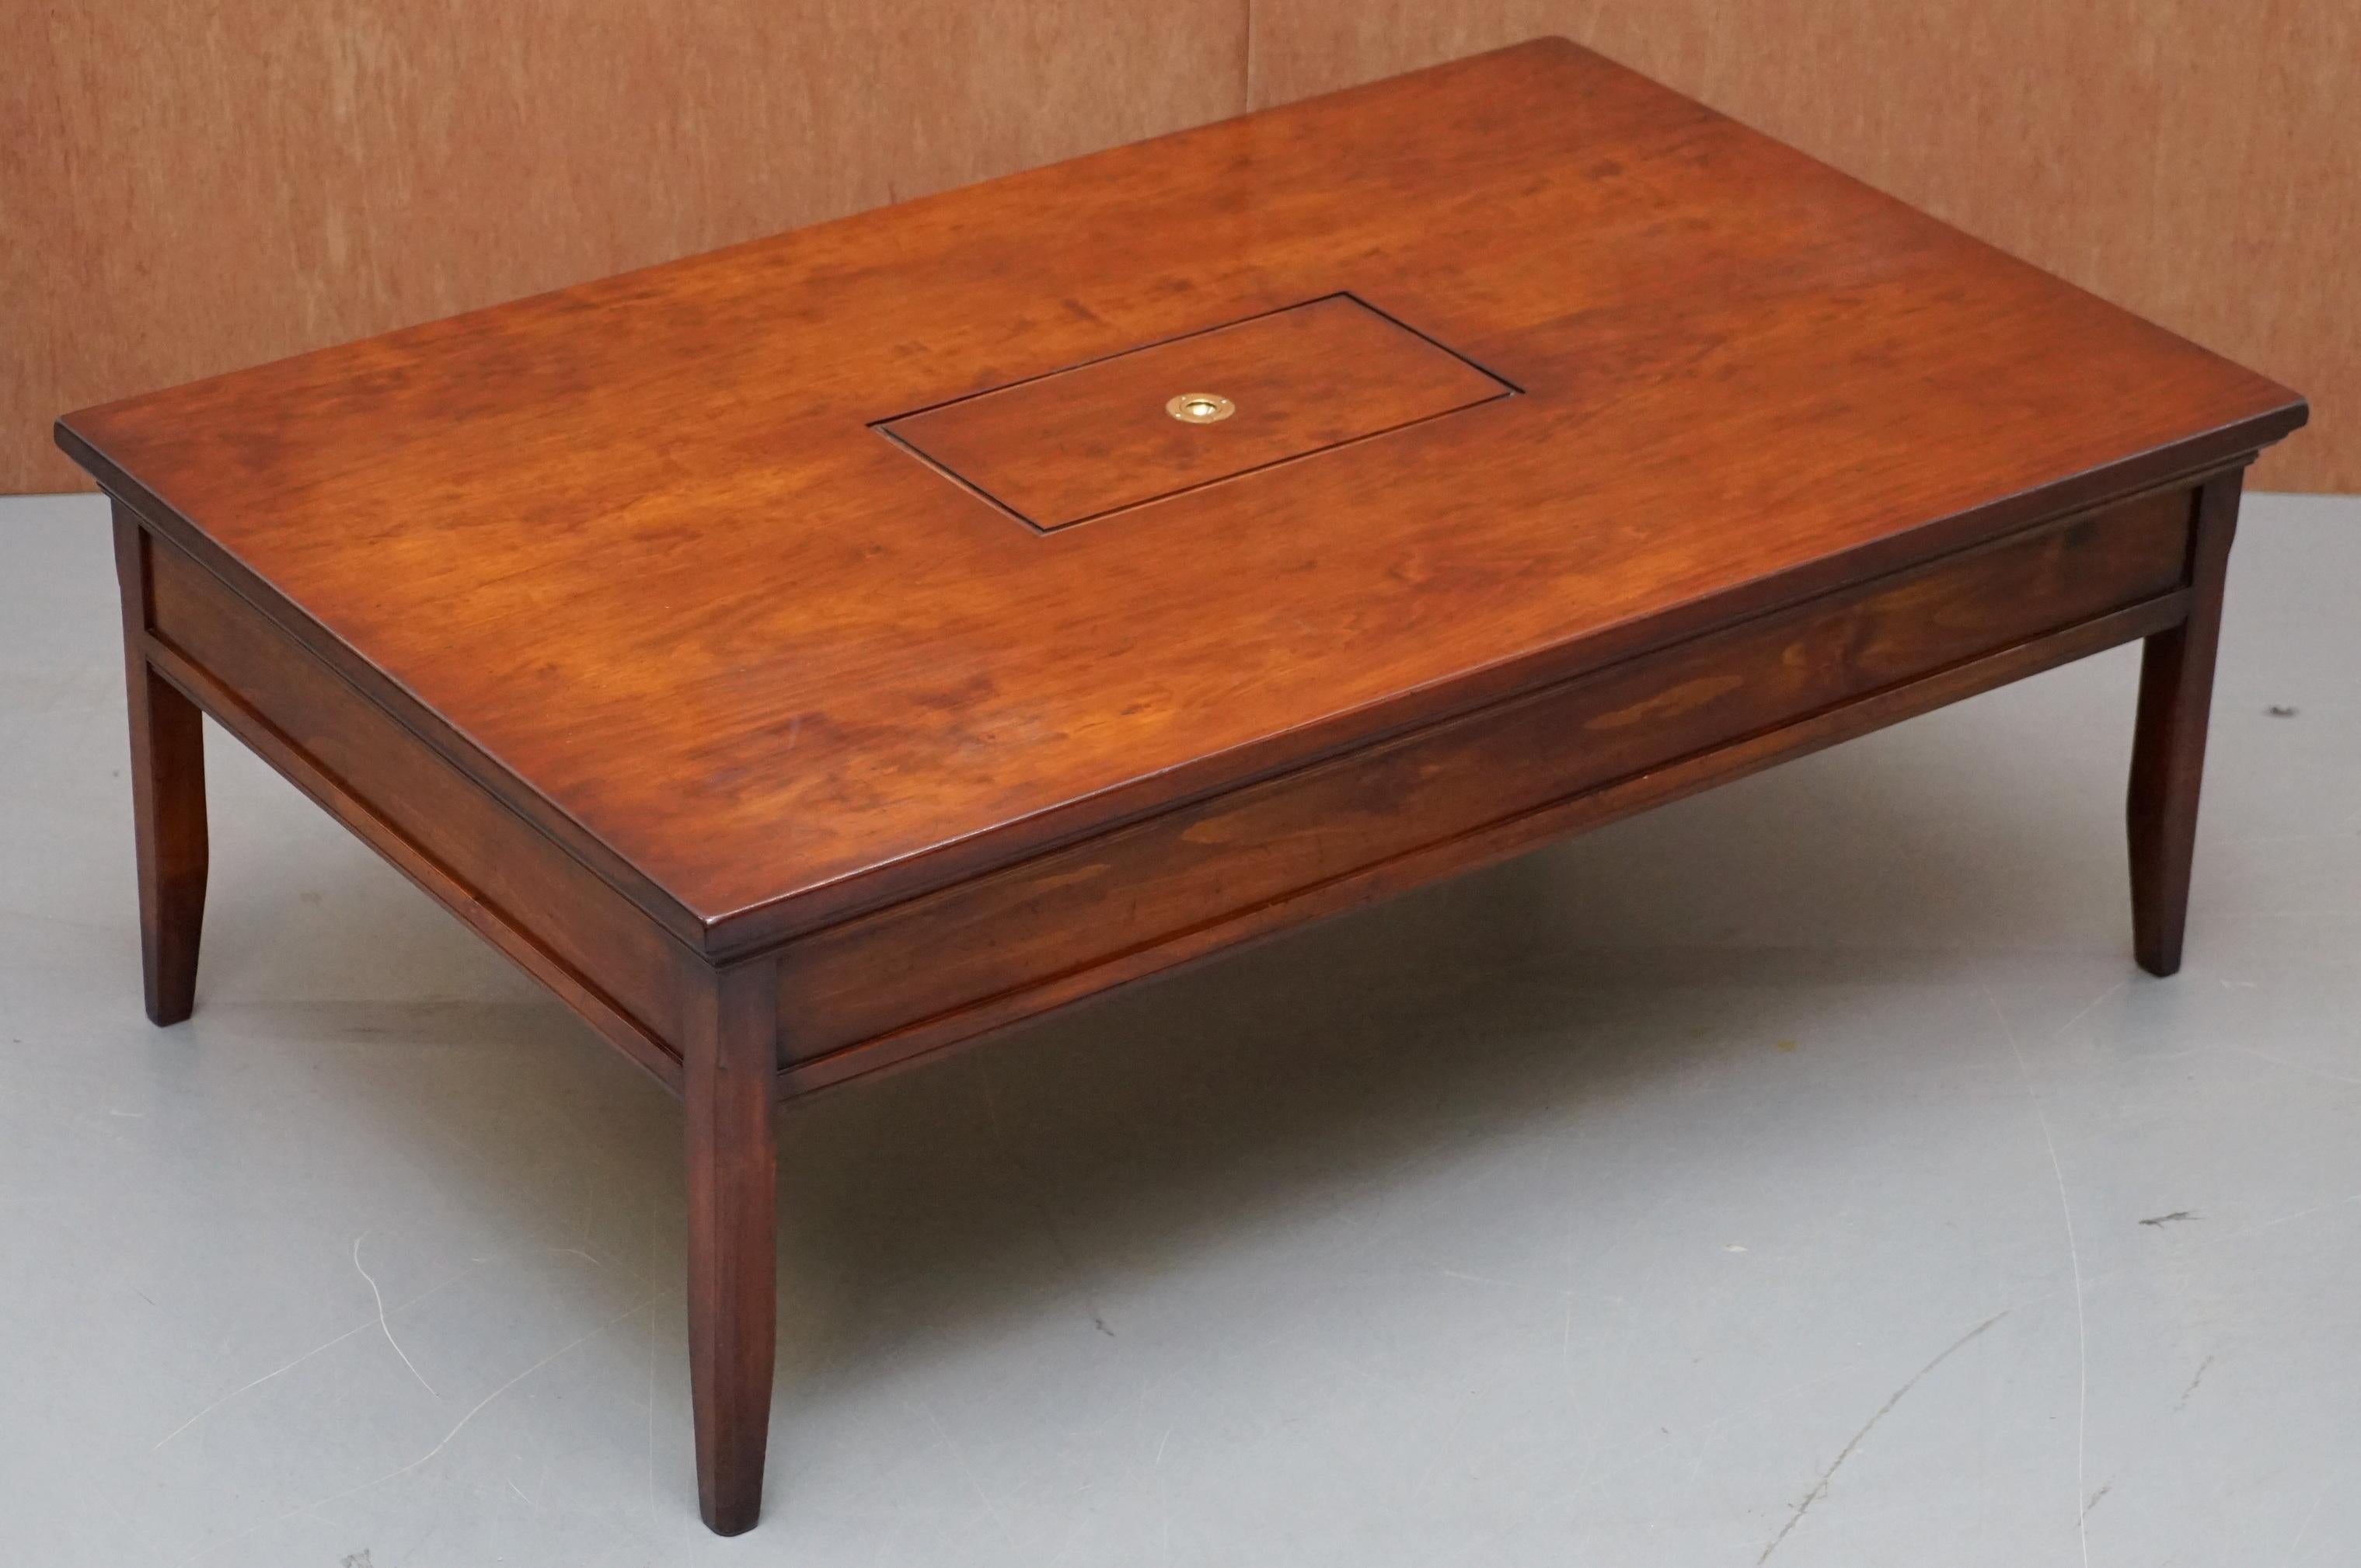 We are delighted to offer for sale this stunning solid mahogany Military Campaign coffee table with internal storage made by REH Kennedy and retailed through Harrods London

A good looking well made and decorative coffee table, we have restored it